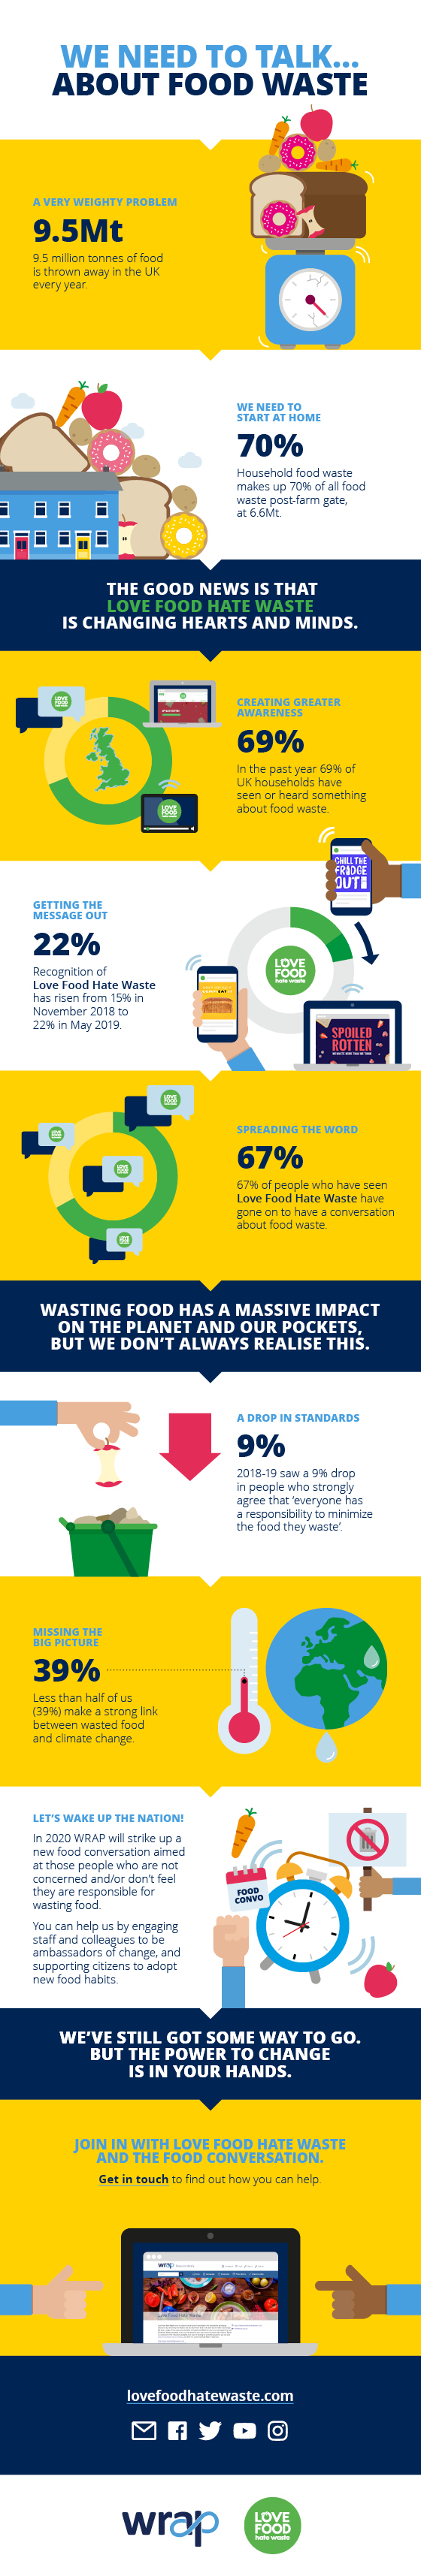 Food waste trends survey 2019 infographic 